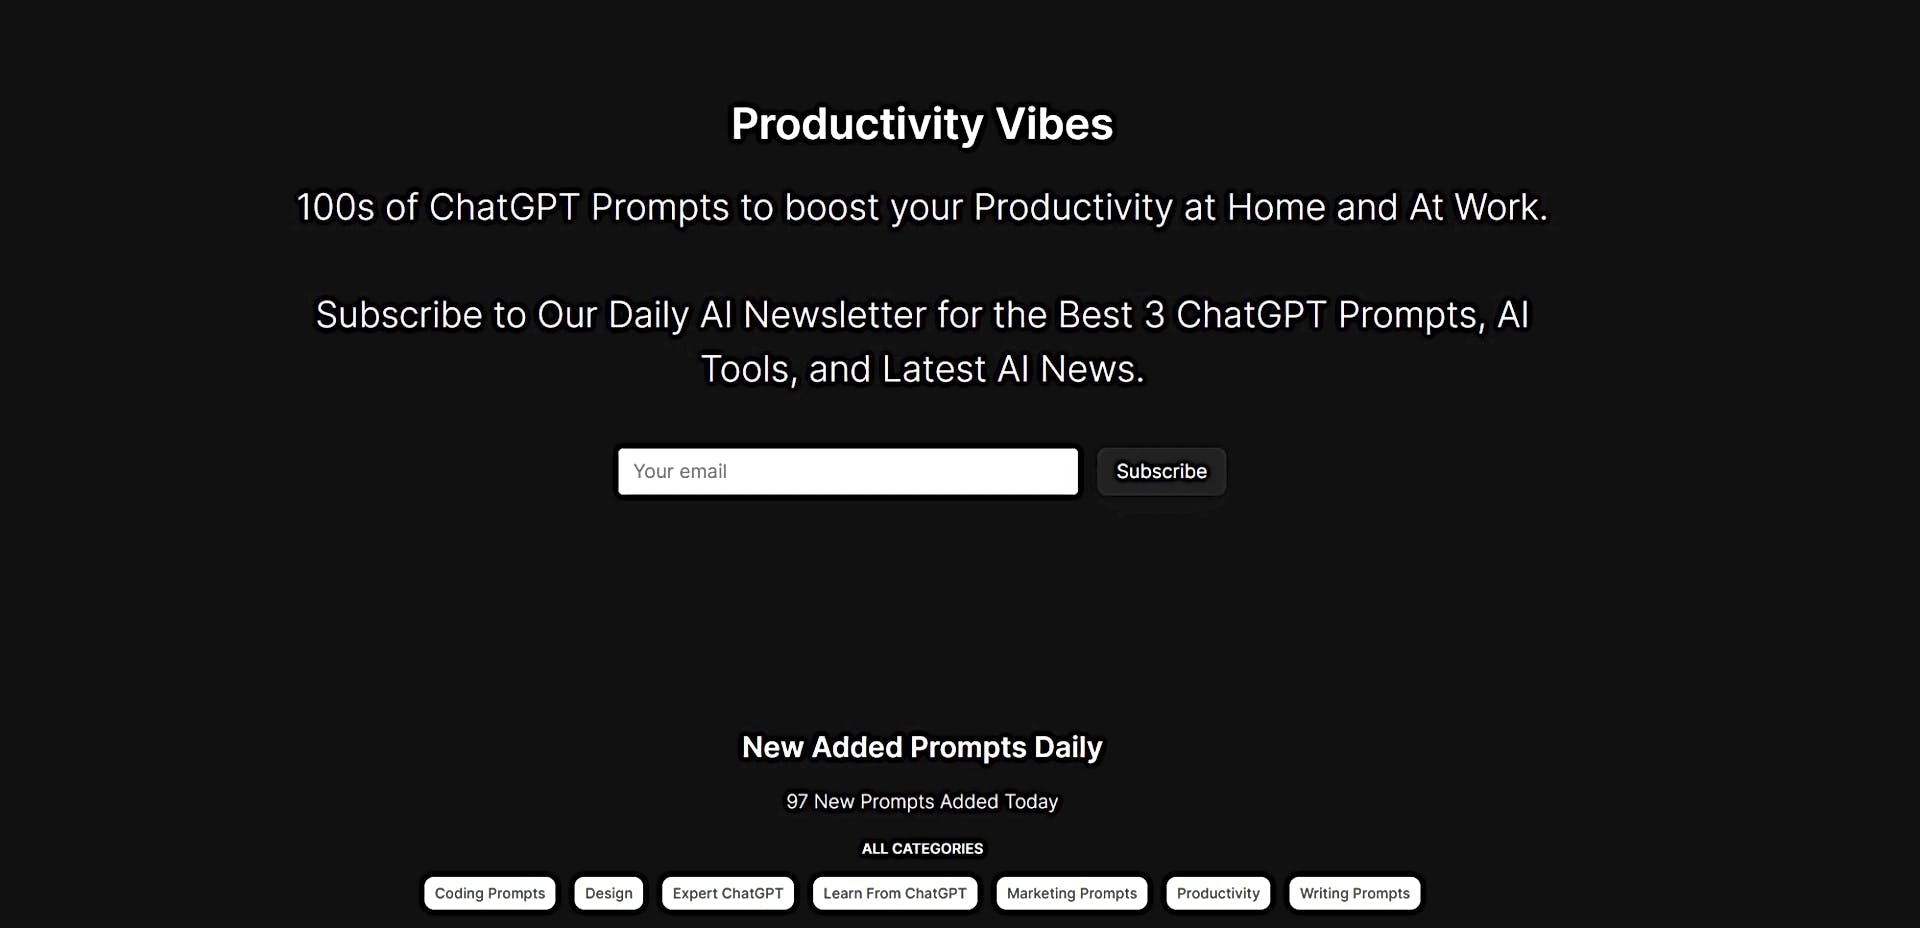 Productivity Vibes featured